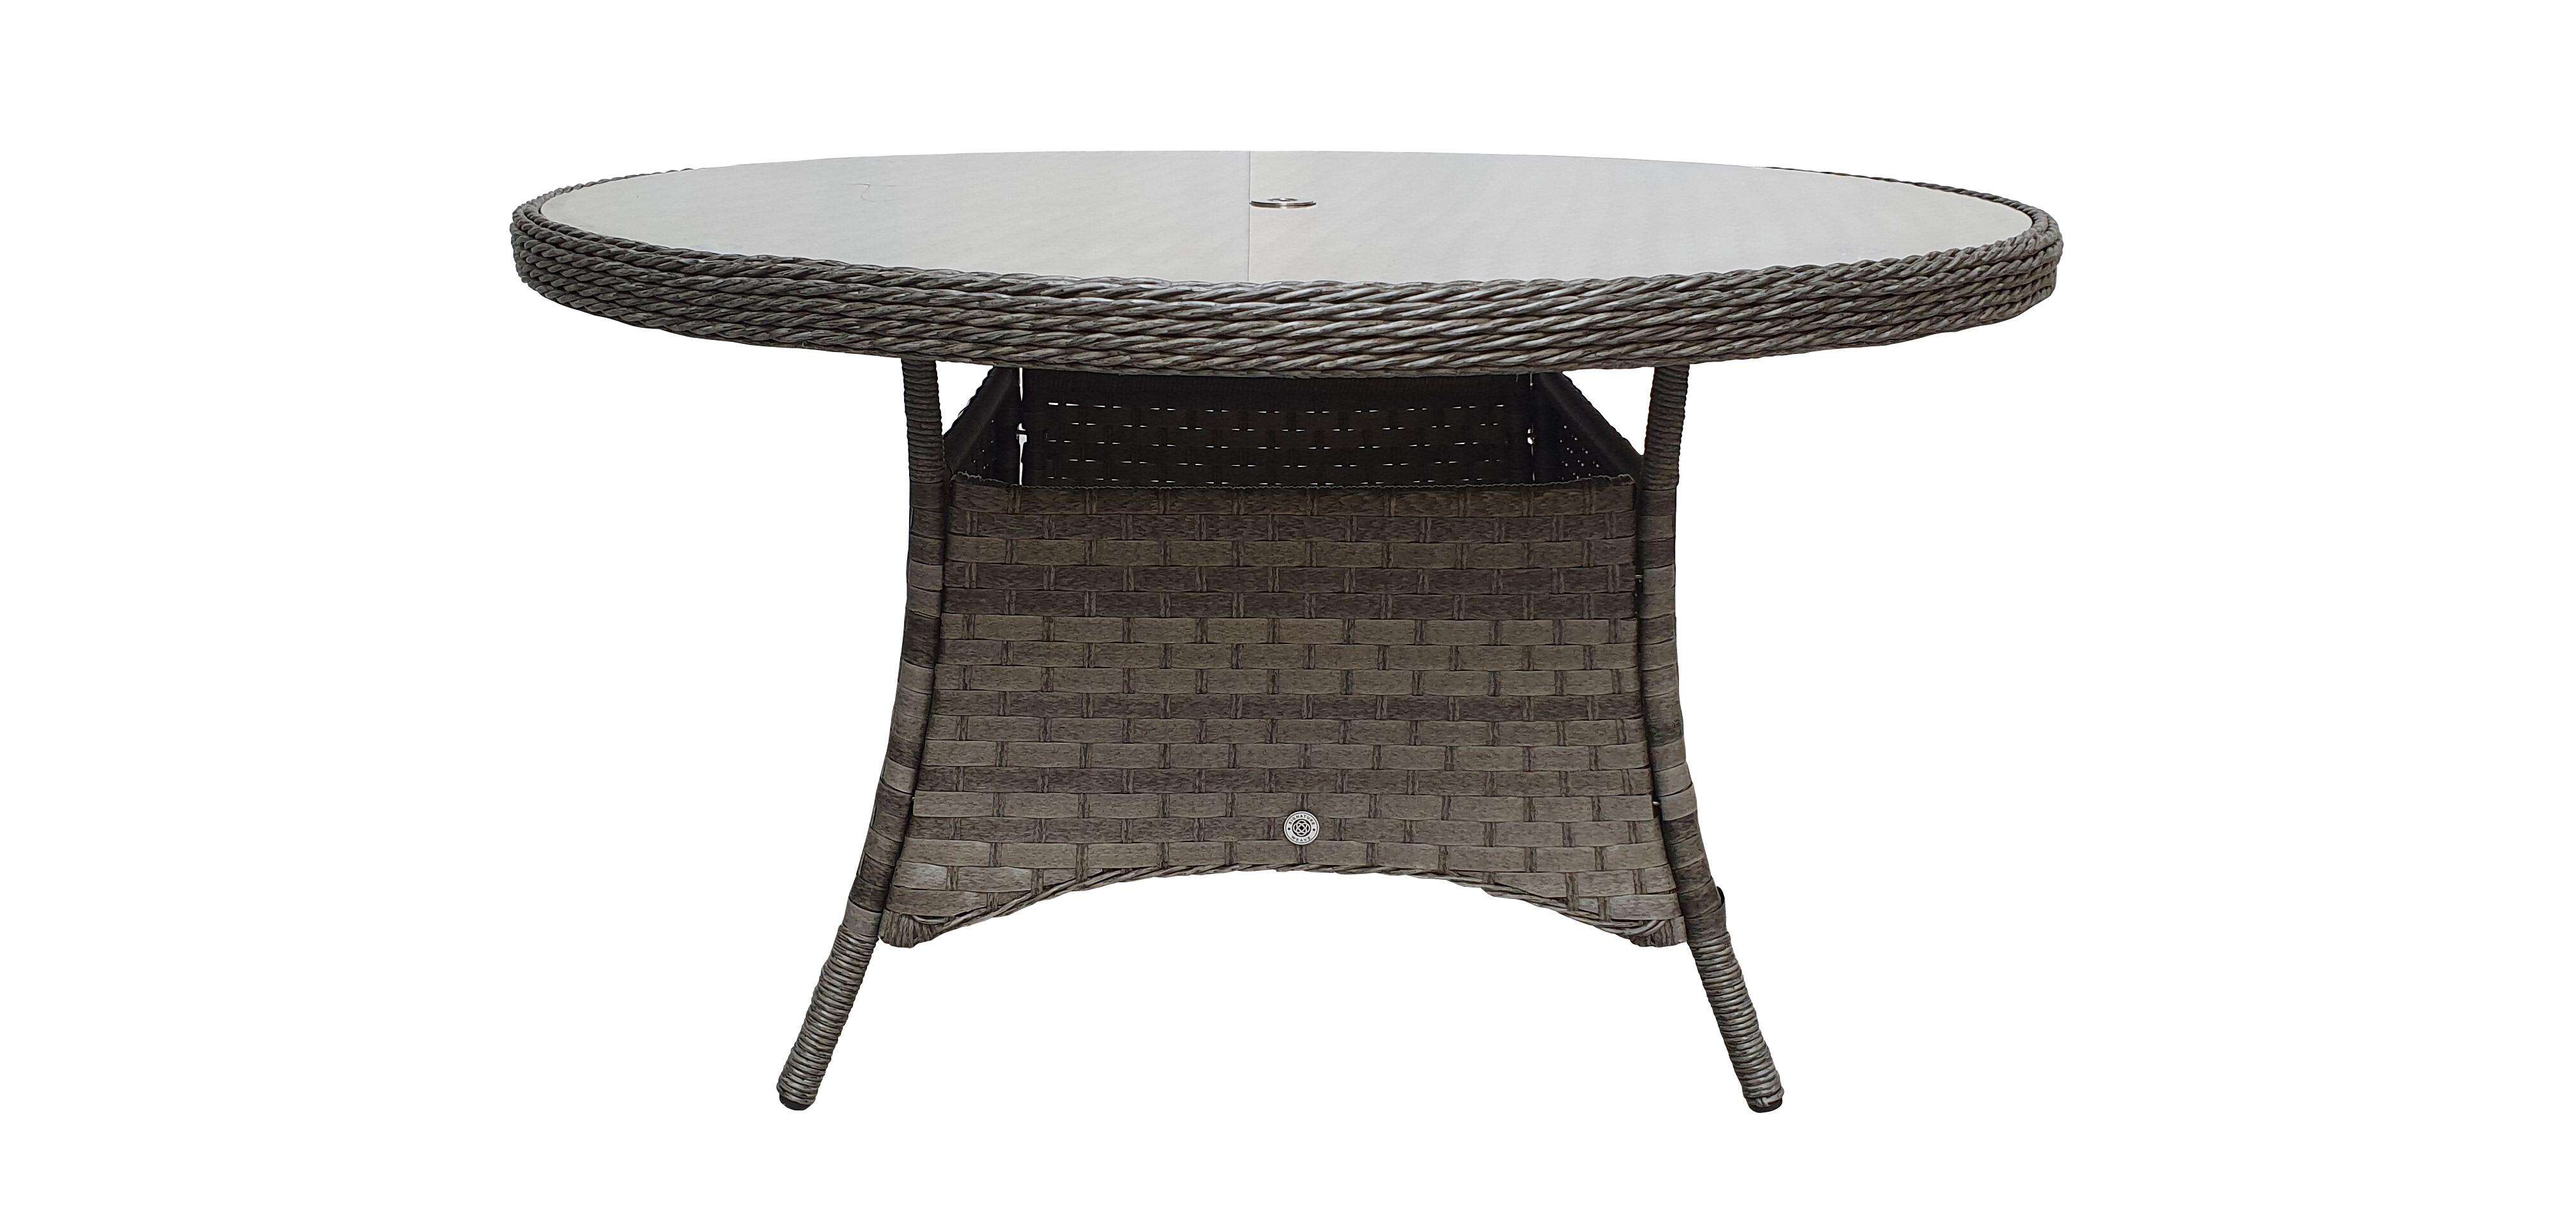 An image of Signature Weave Victoria Round 135 Dia Table Garden Furniture